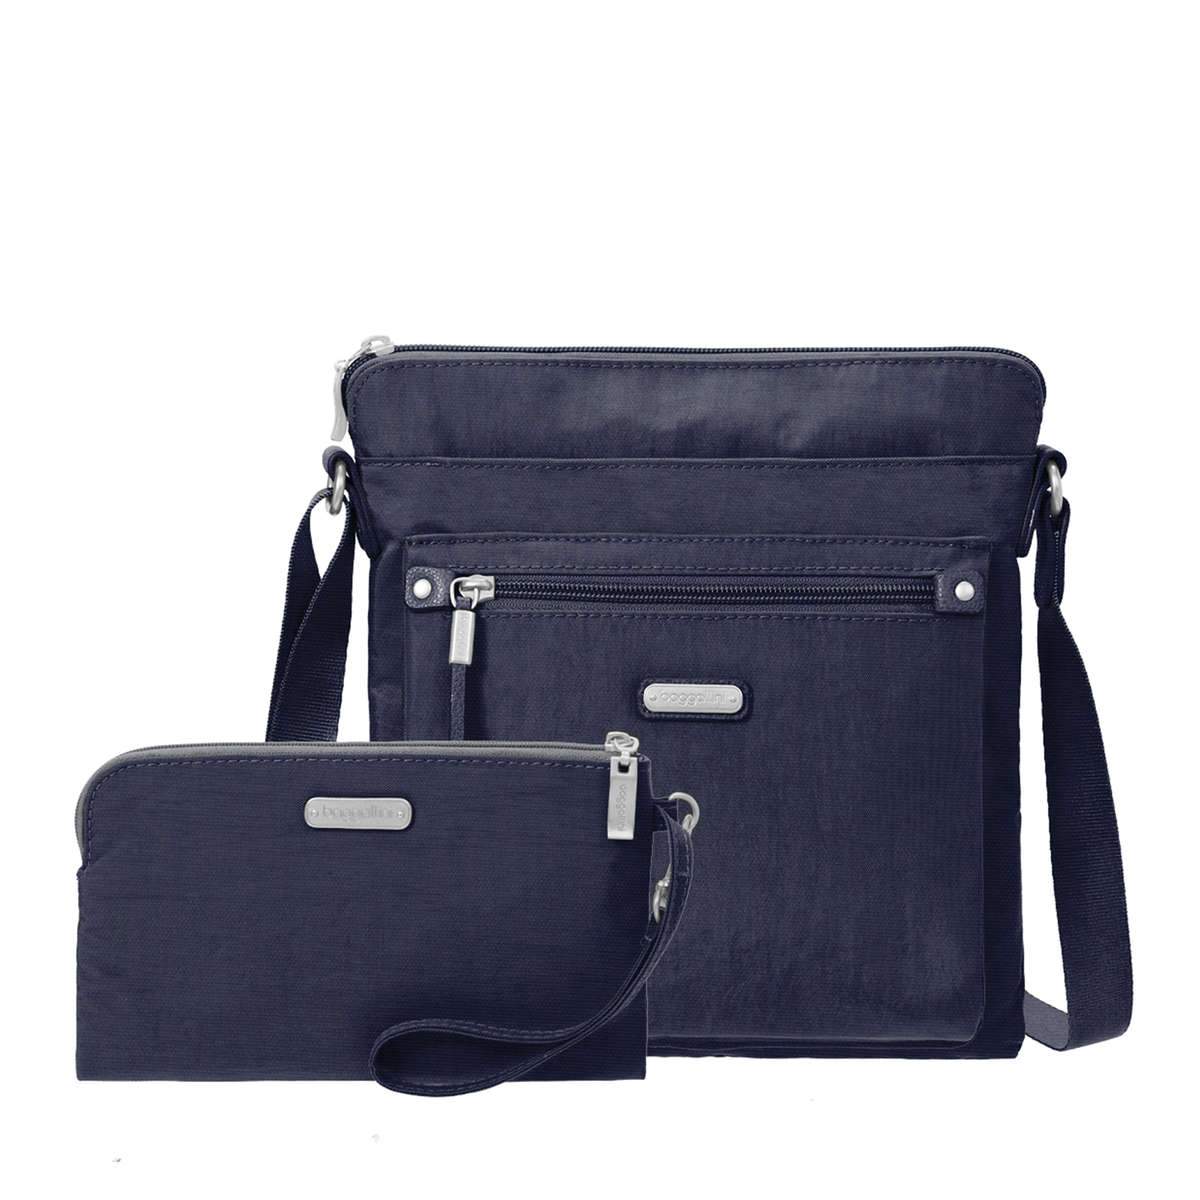 Baggallini Go Bagg With RFID Phone Wristlet - Navy